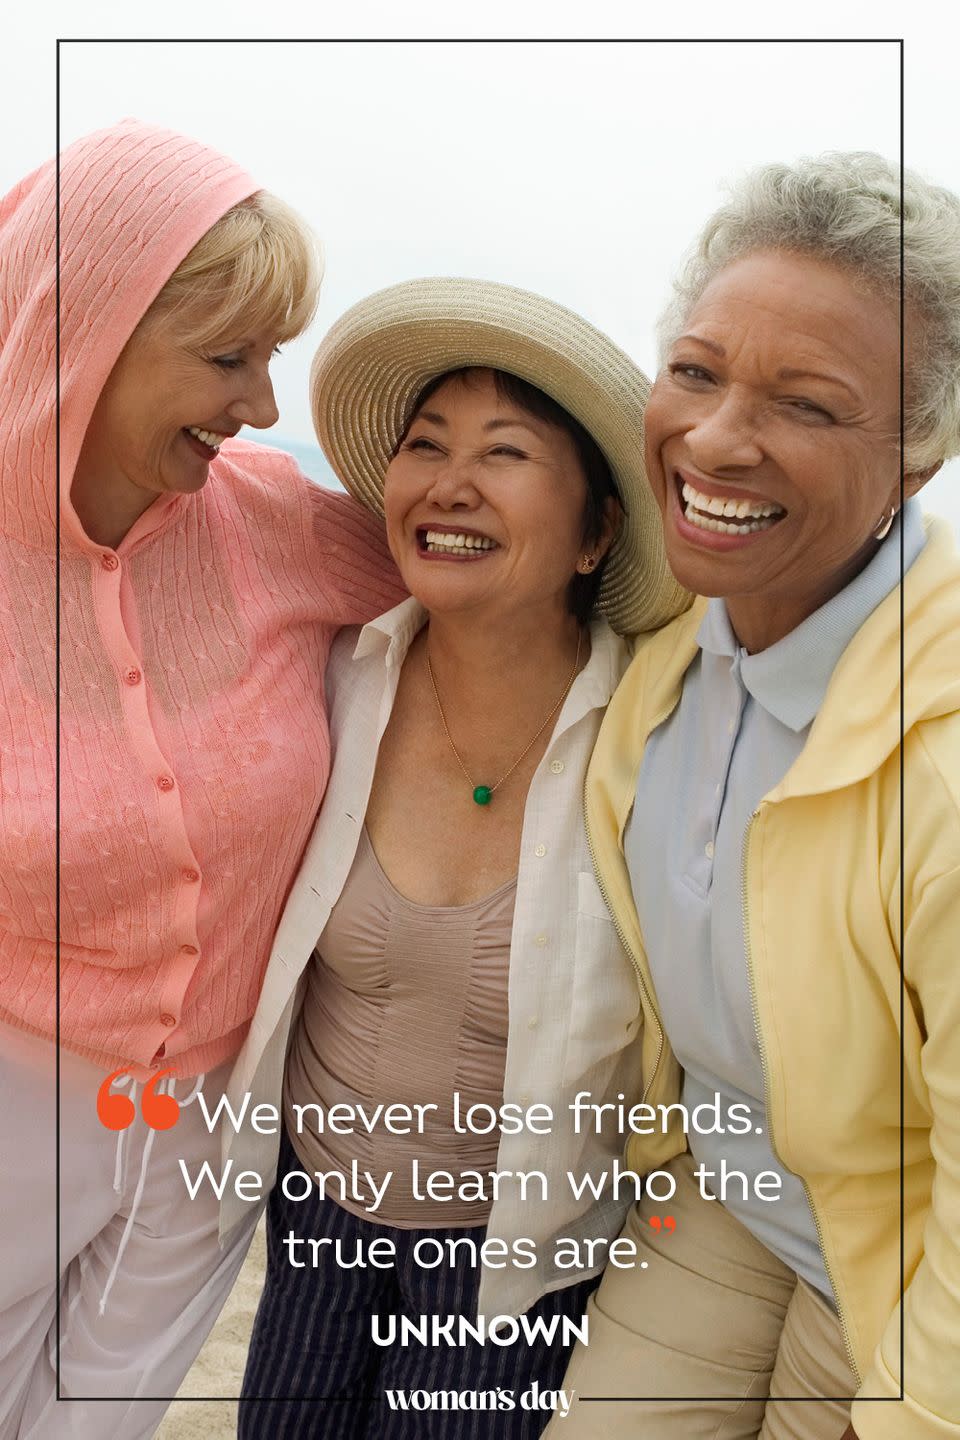 <p>“We never lose friends. We only learn who the true ones are.” </p>